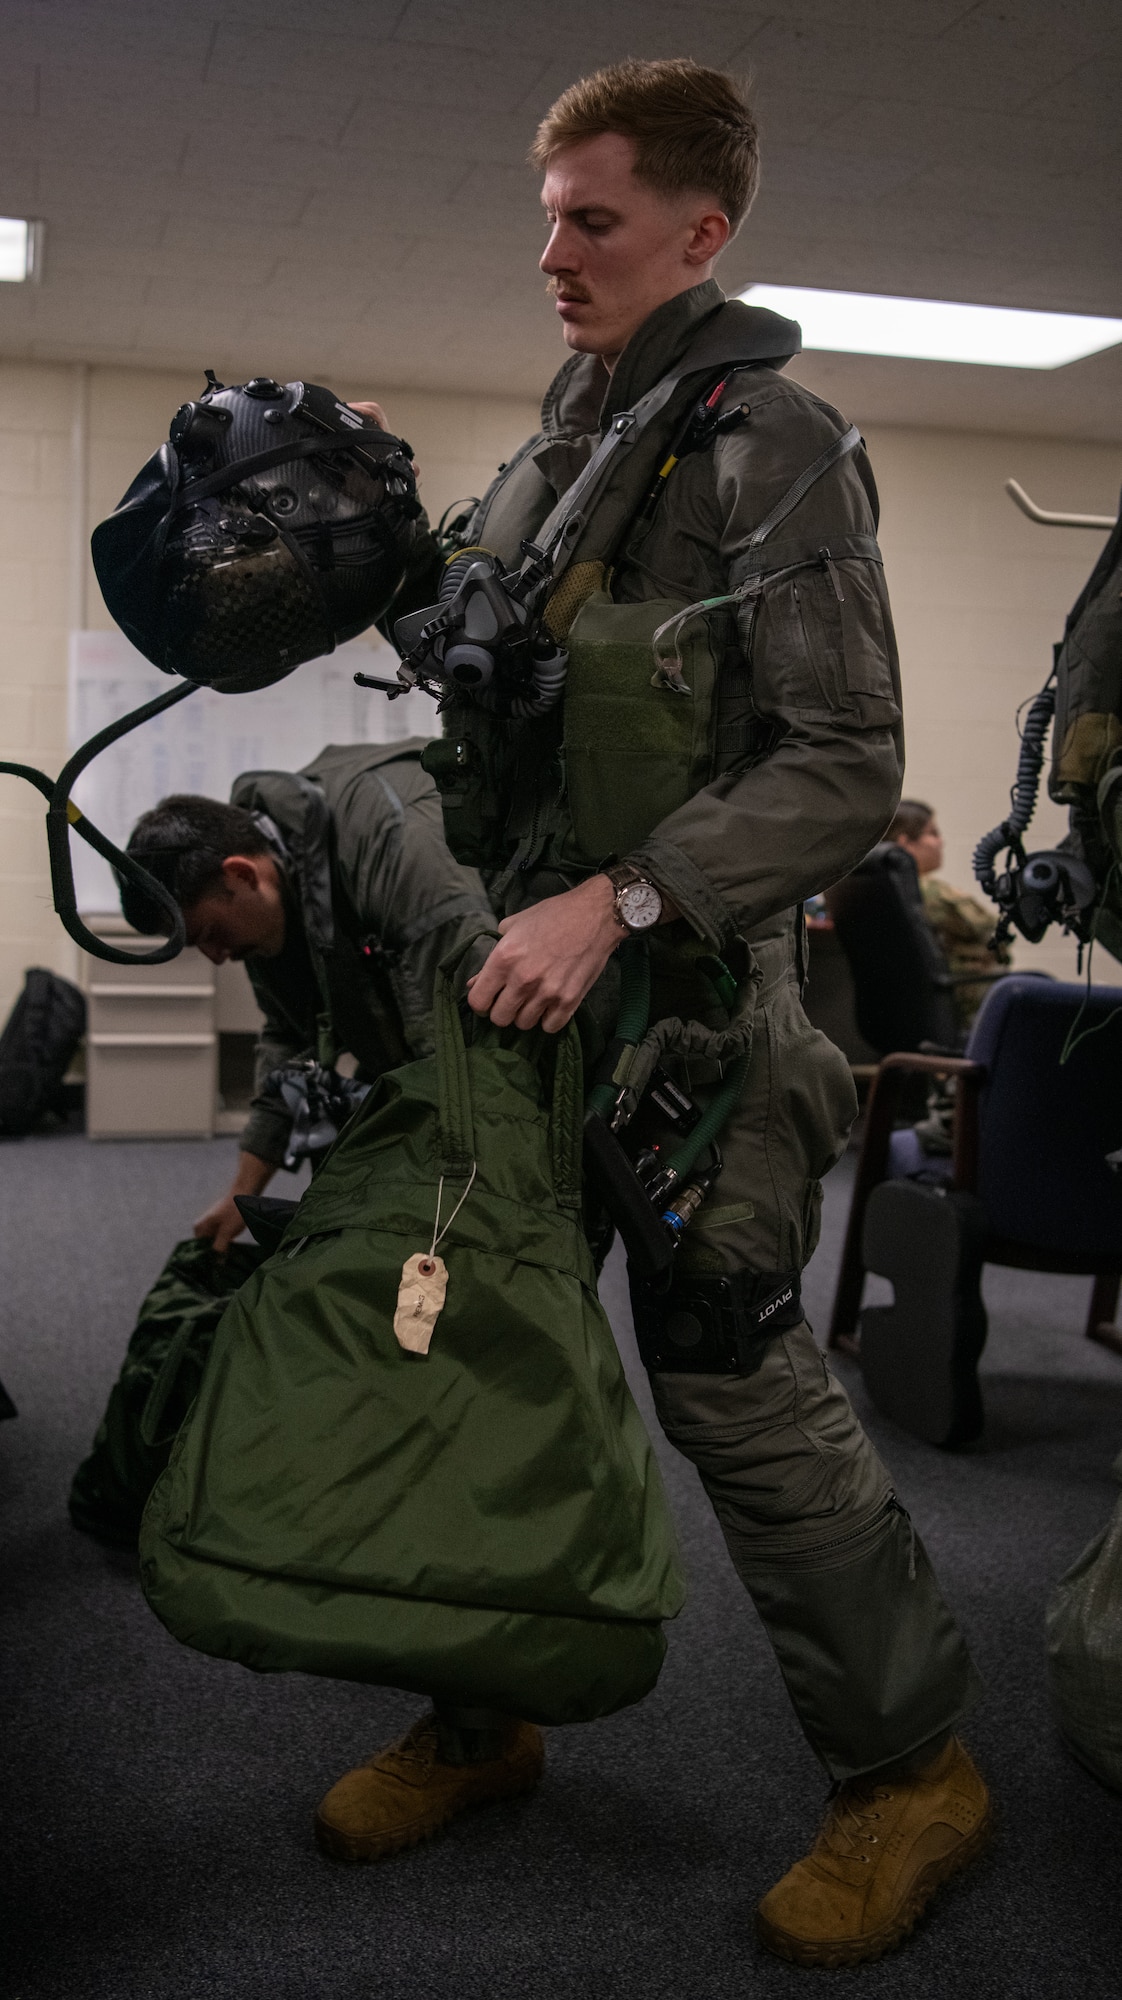 A pilot holds a bag and helmet while conducting pre-flight preparations.